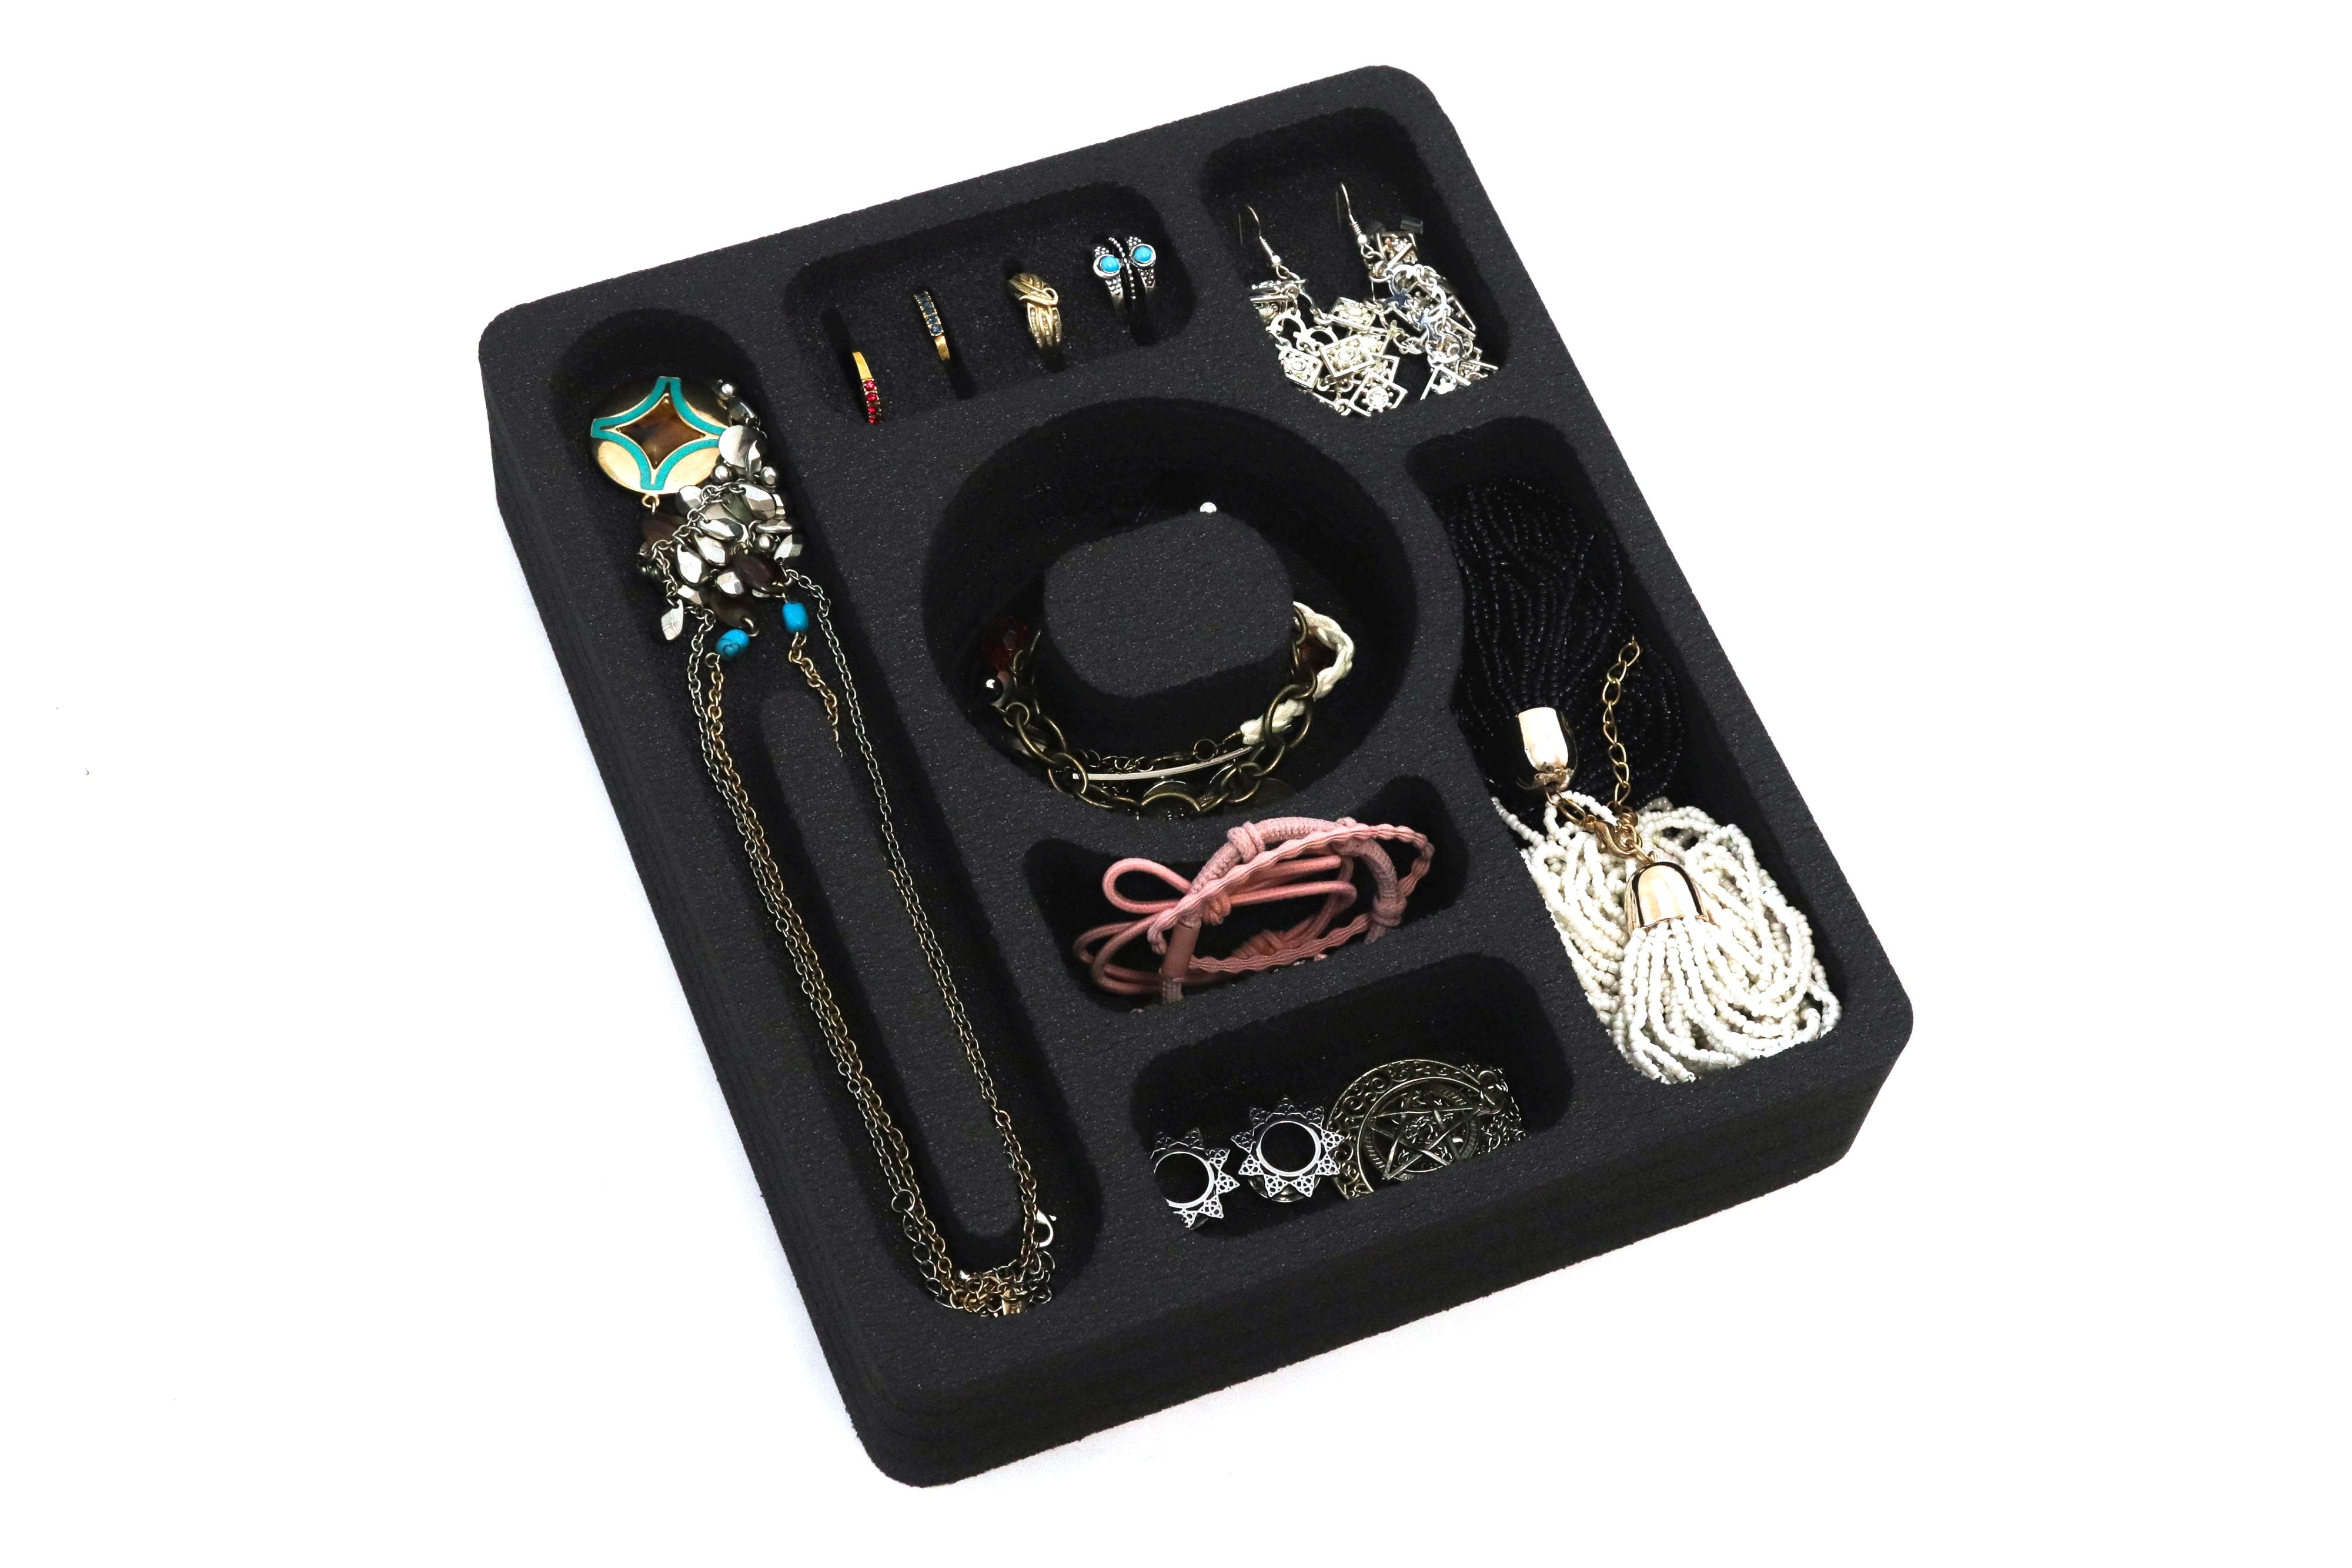 Jewelry Drawer Organizer (Rings, Necklaces, More) 8.6" x 10.25"